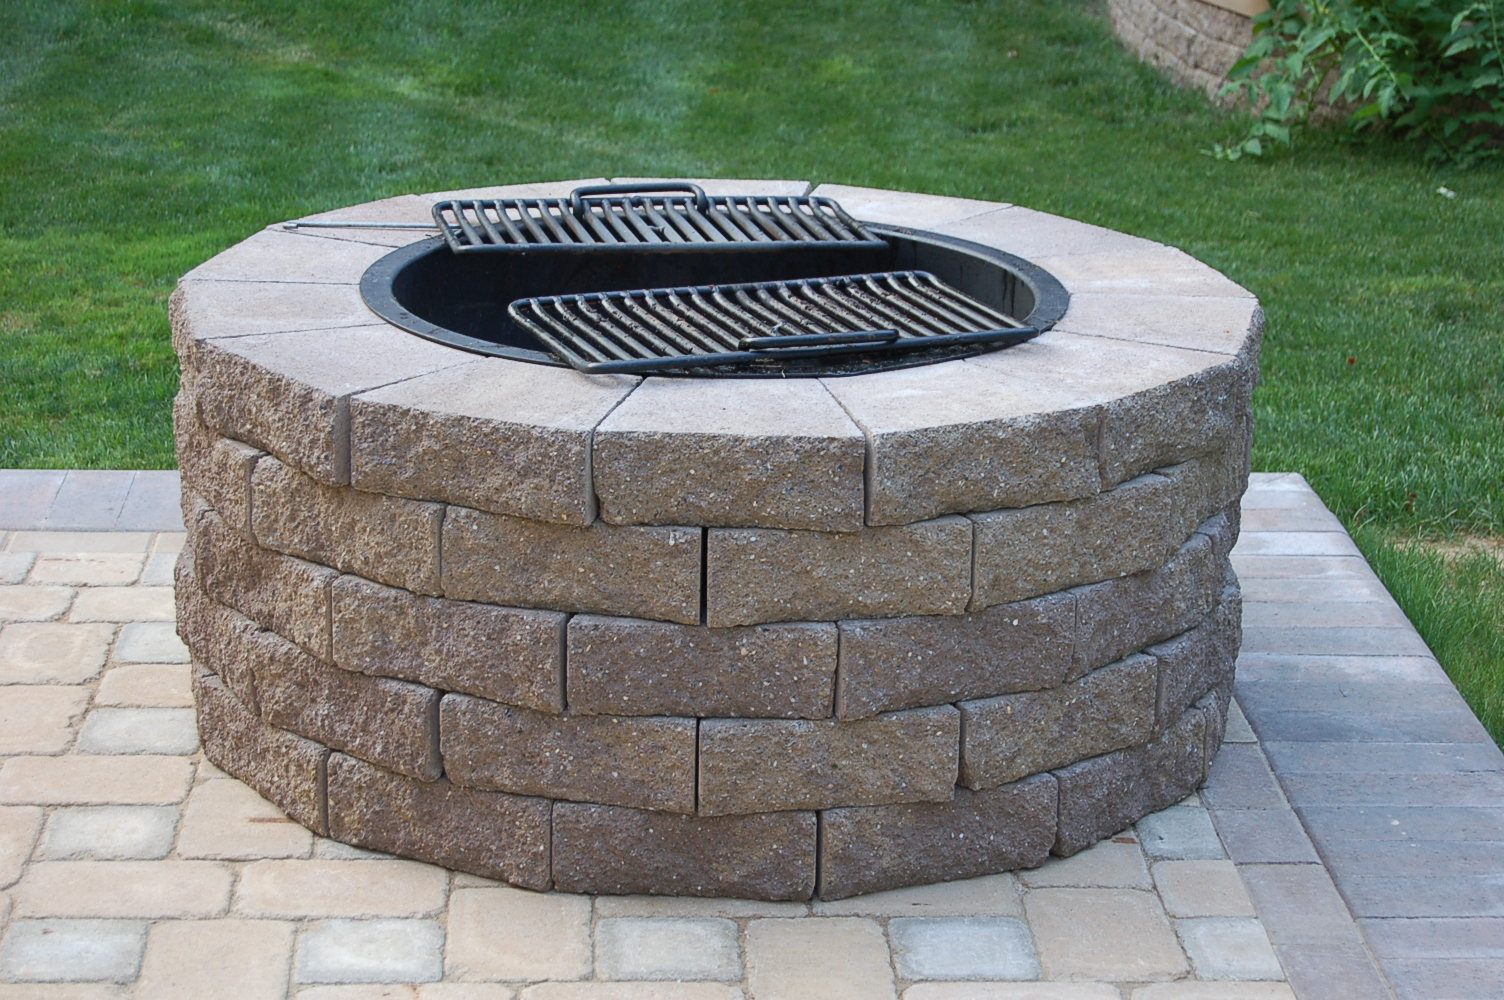 Fire Pit Cooking Grate Fireplace Design Ideas throughout size 1504 X 1000